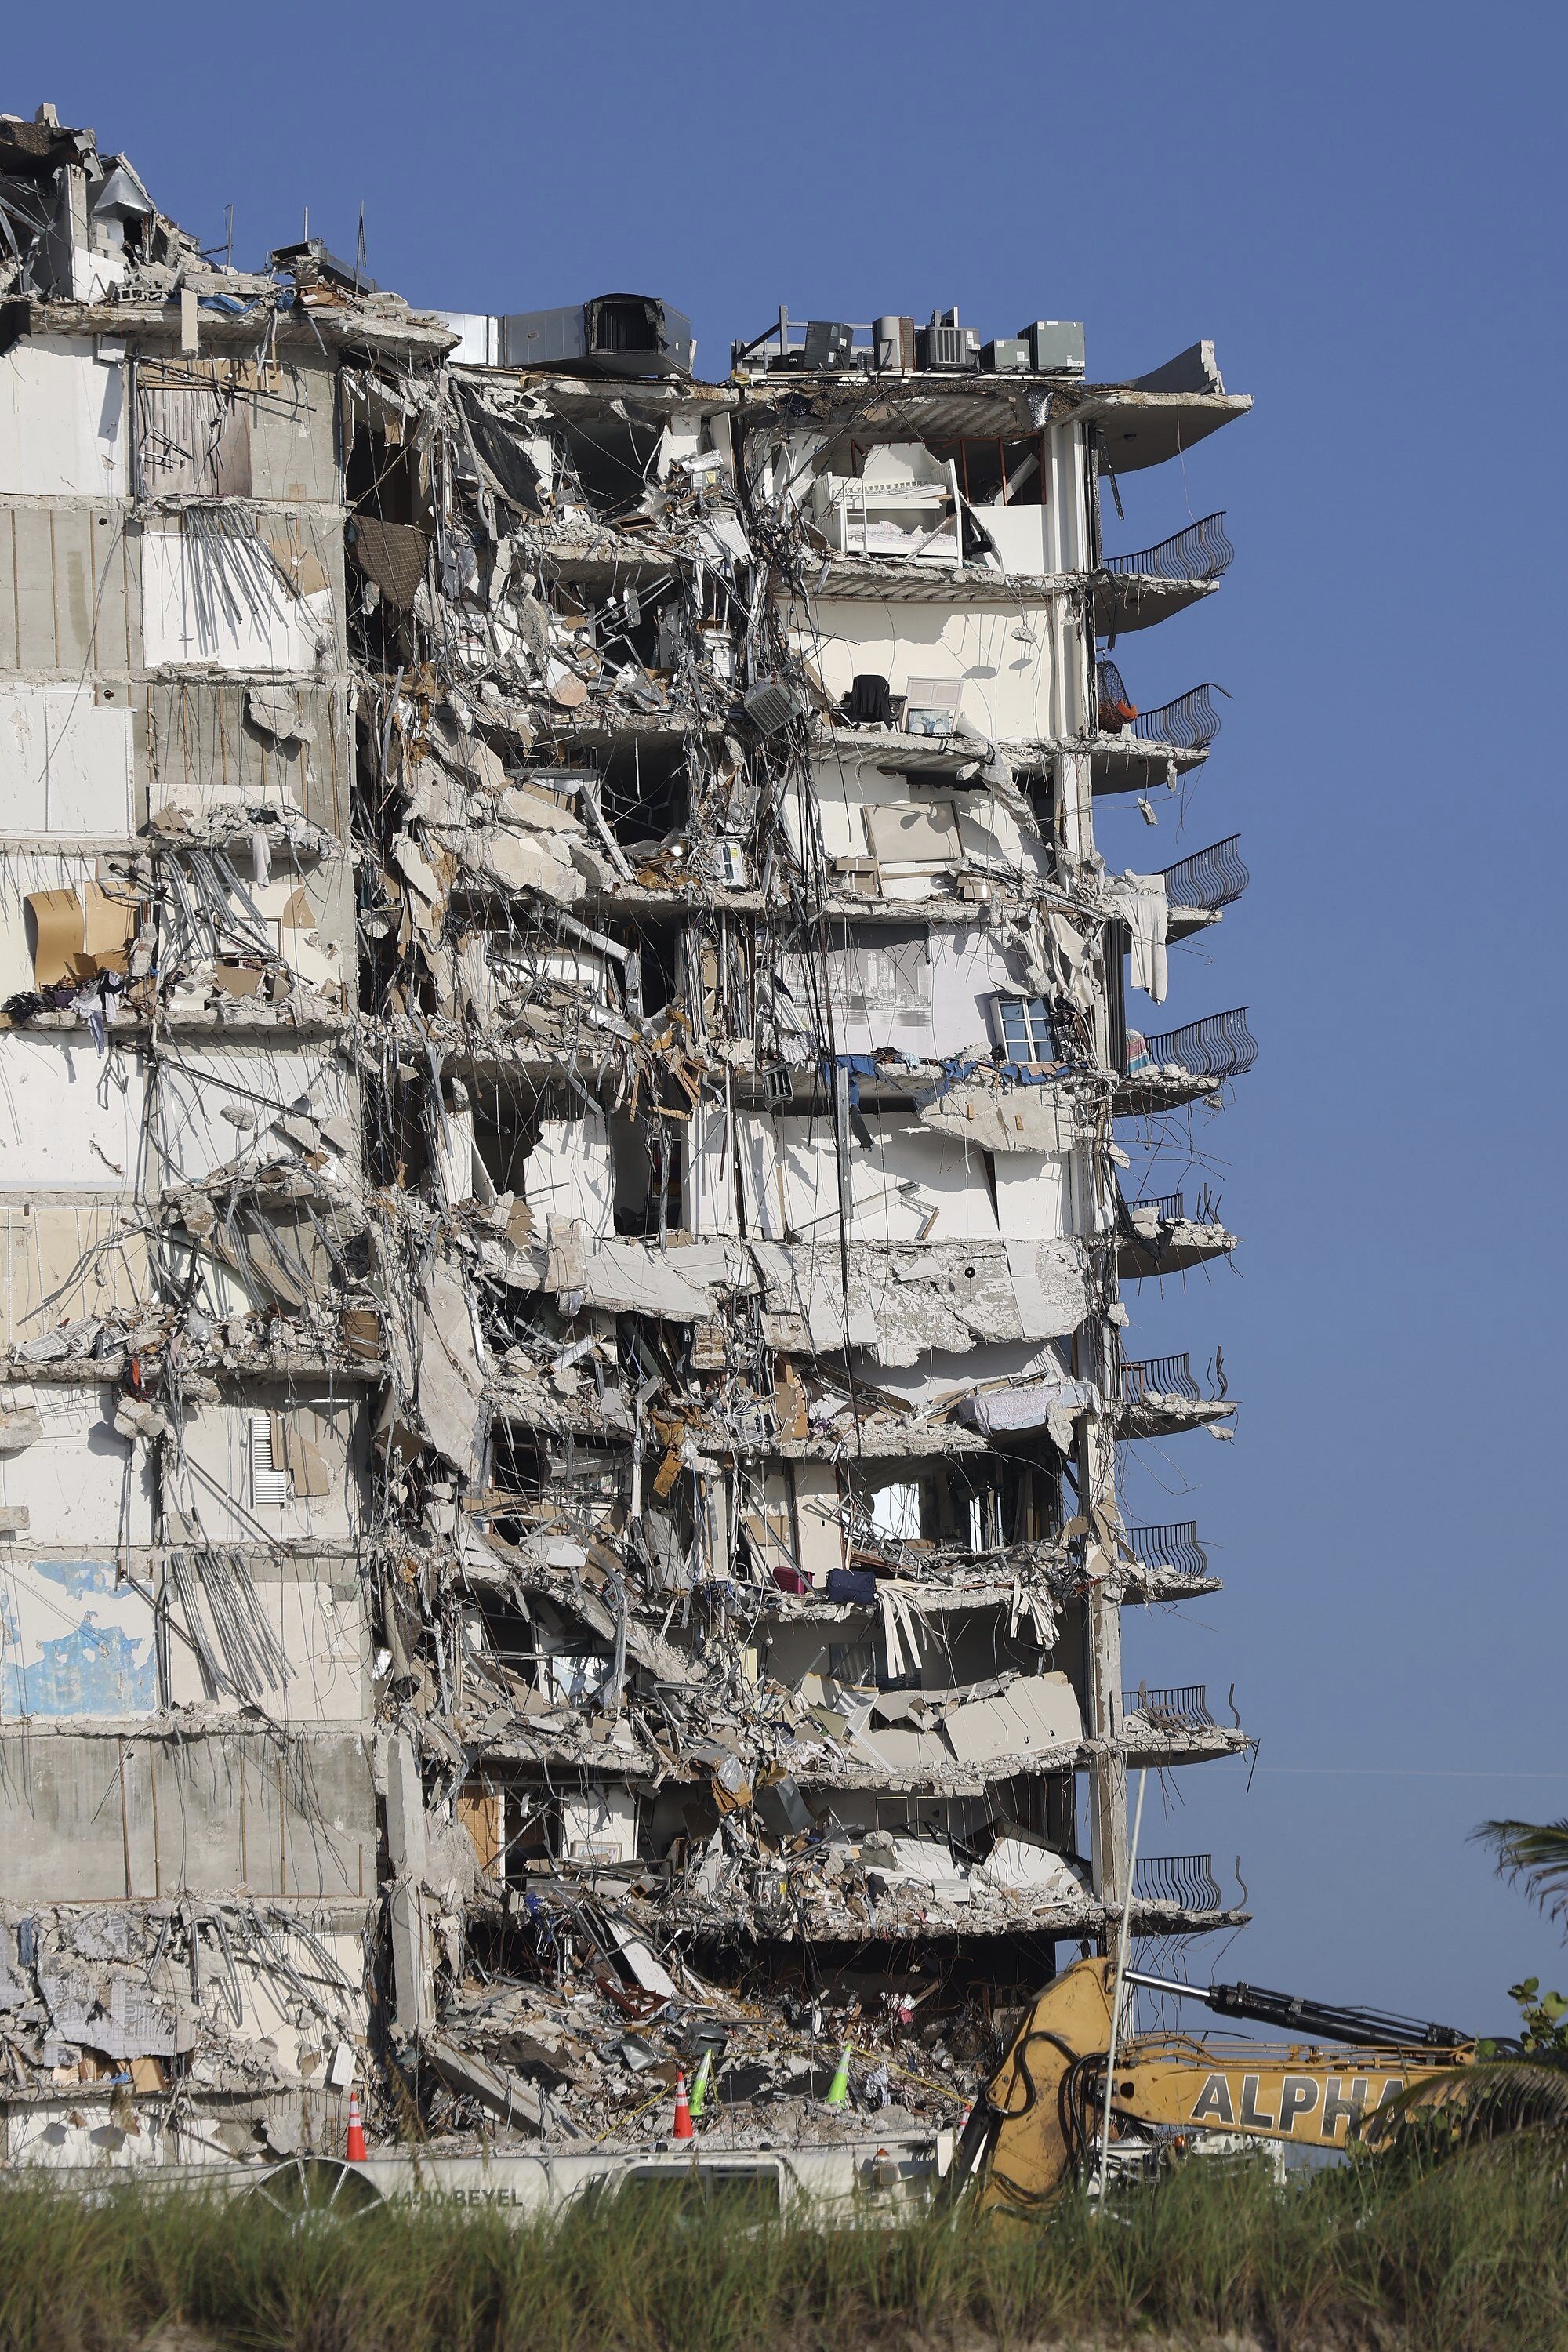 The remaining debris of the collapsed Champlain Towers South is seen as the rescue operation slows down in preparation for the demolition, Surfside, Florida, U.S., July 4, 2021. (AP Photo)